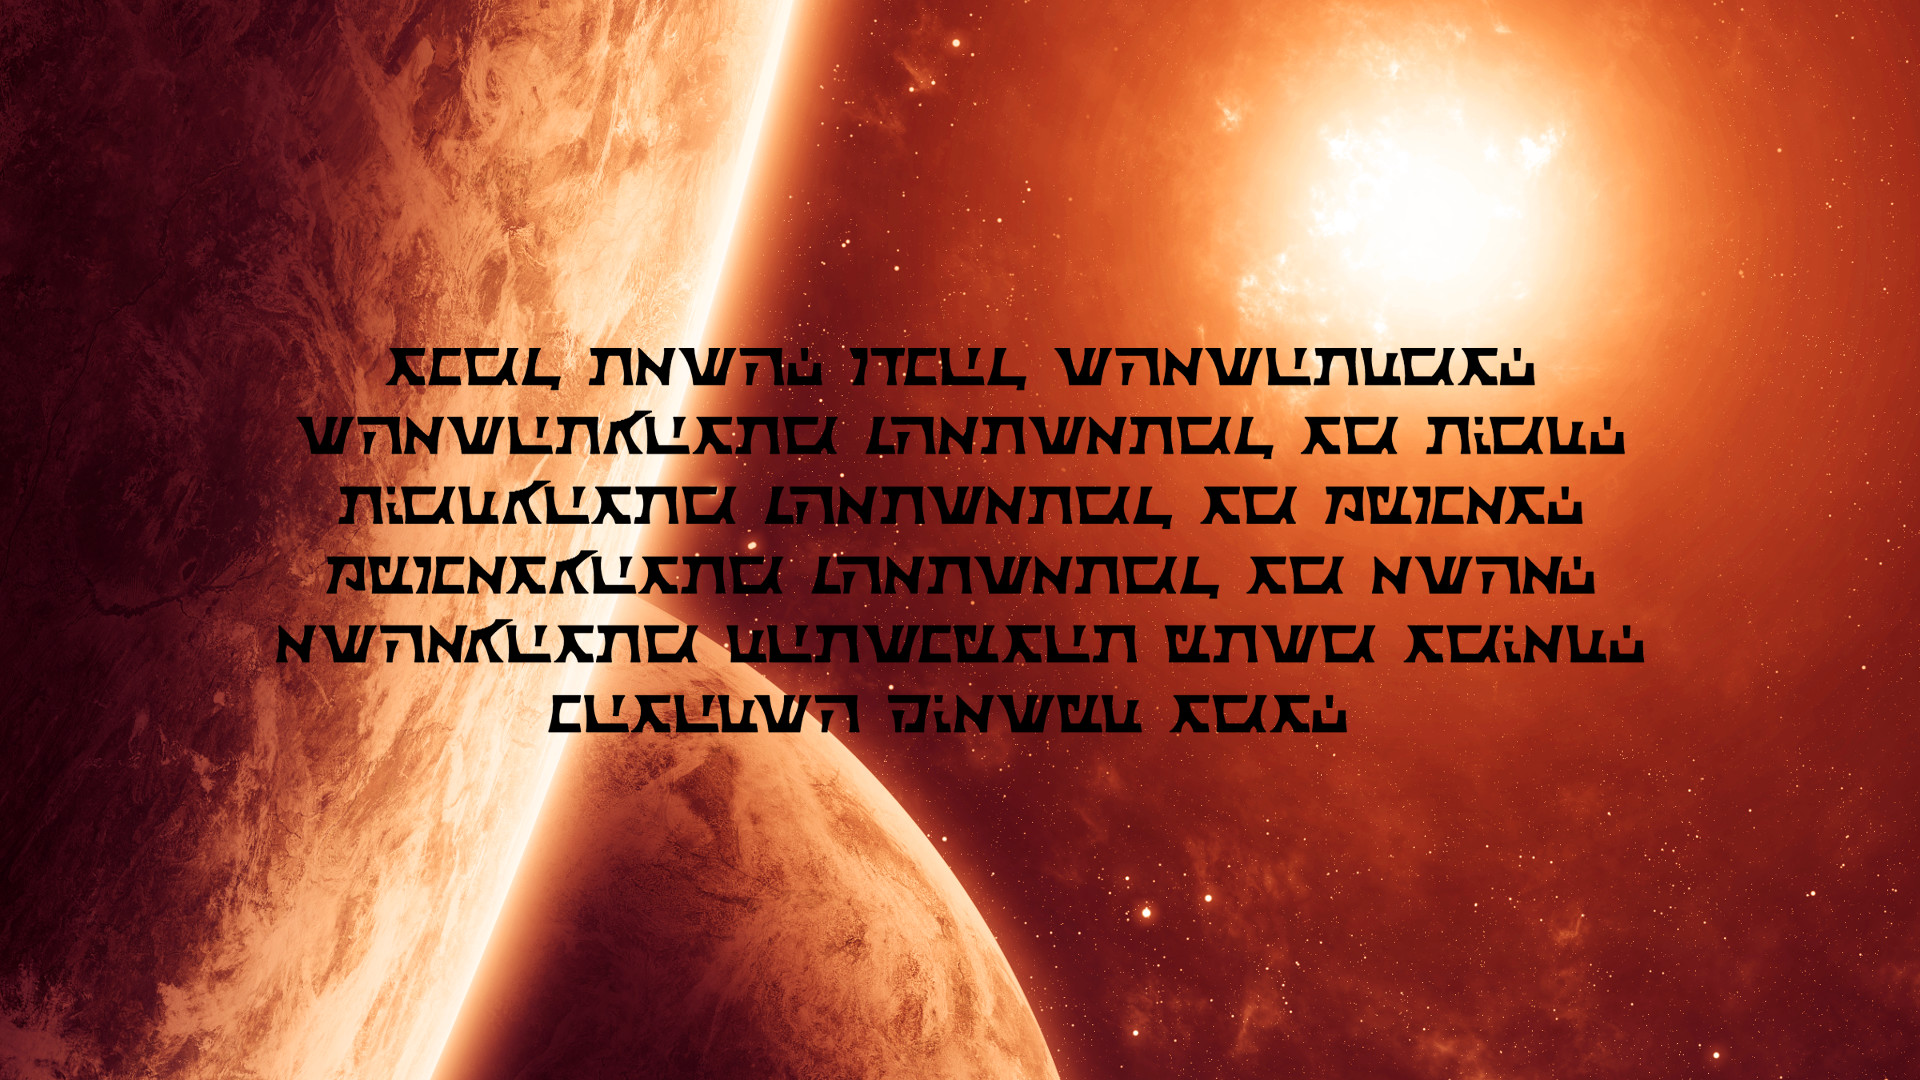 1920x1080 The Sith Code Qotsisajak by Hyperion127 The Sith Code Qotsisajak by  Hyperion127